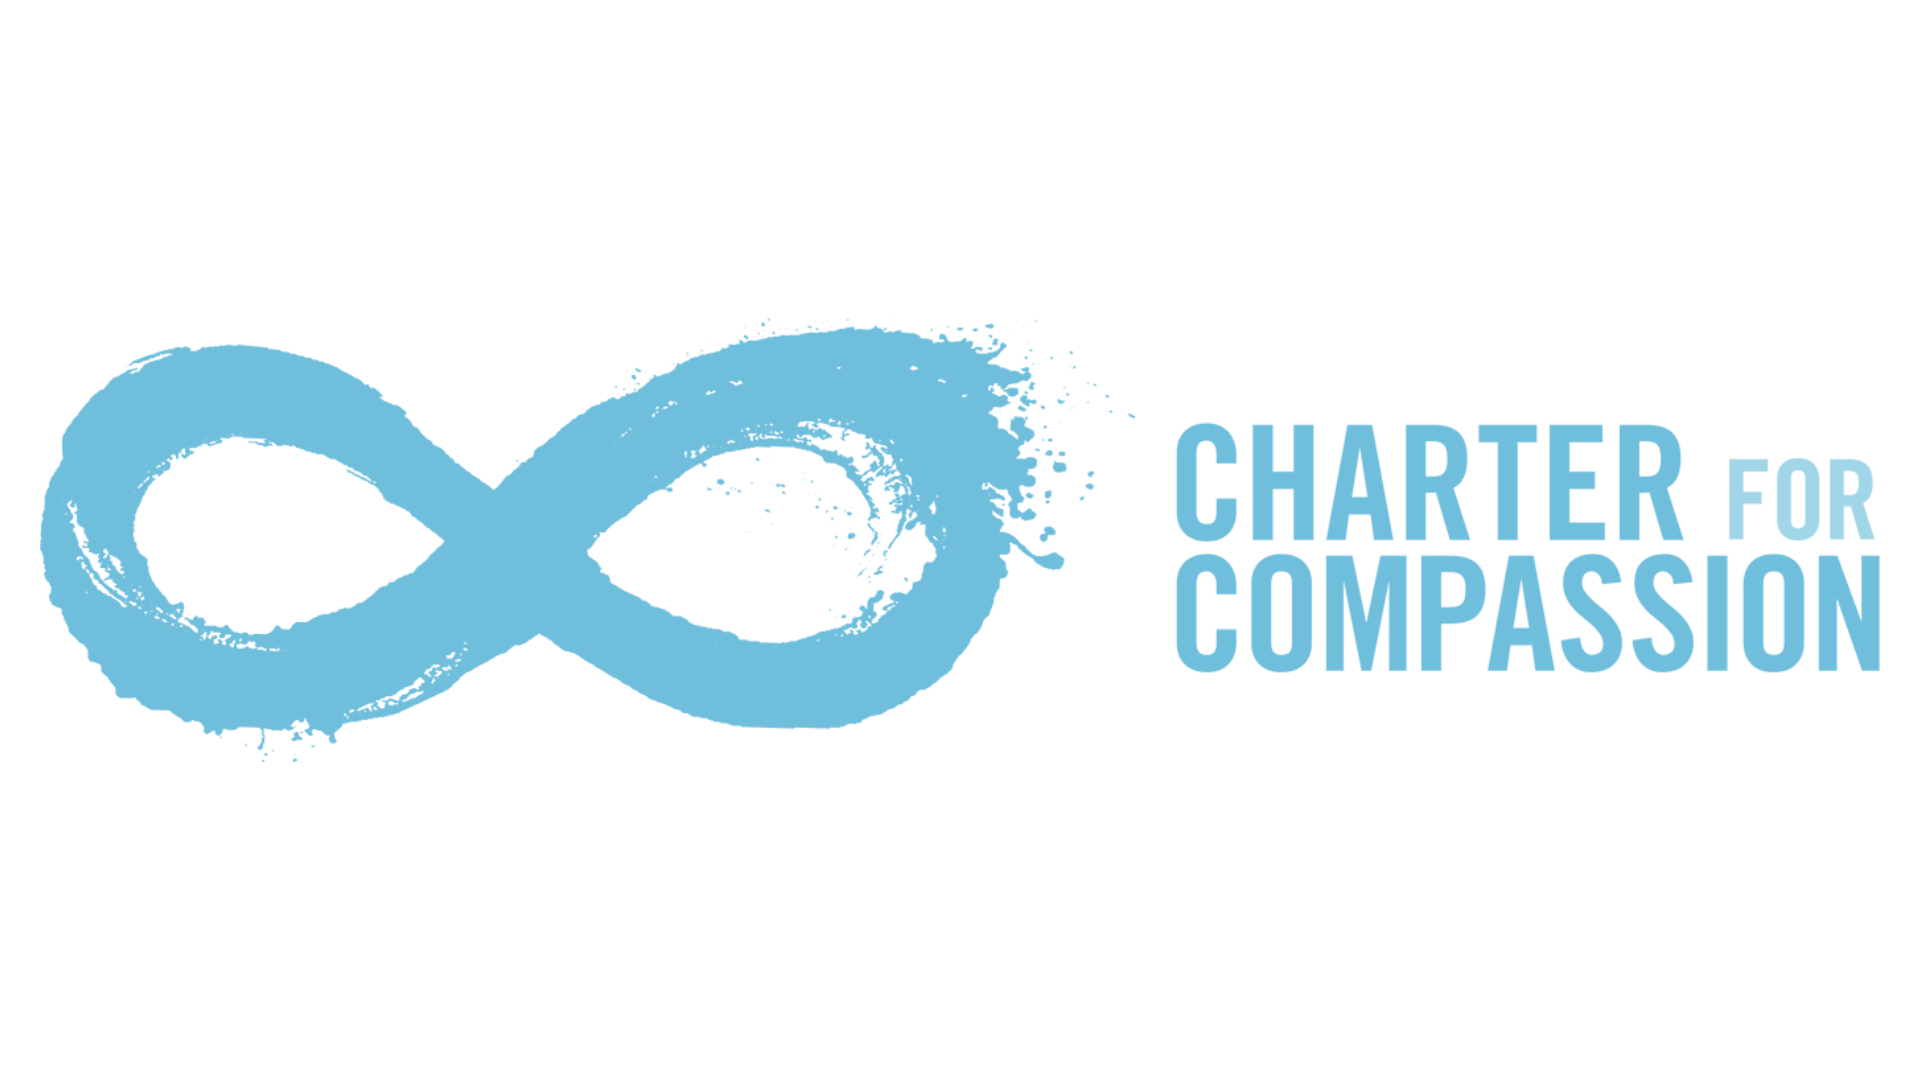 Charter for Compassion